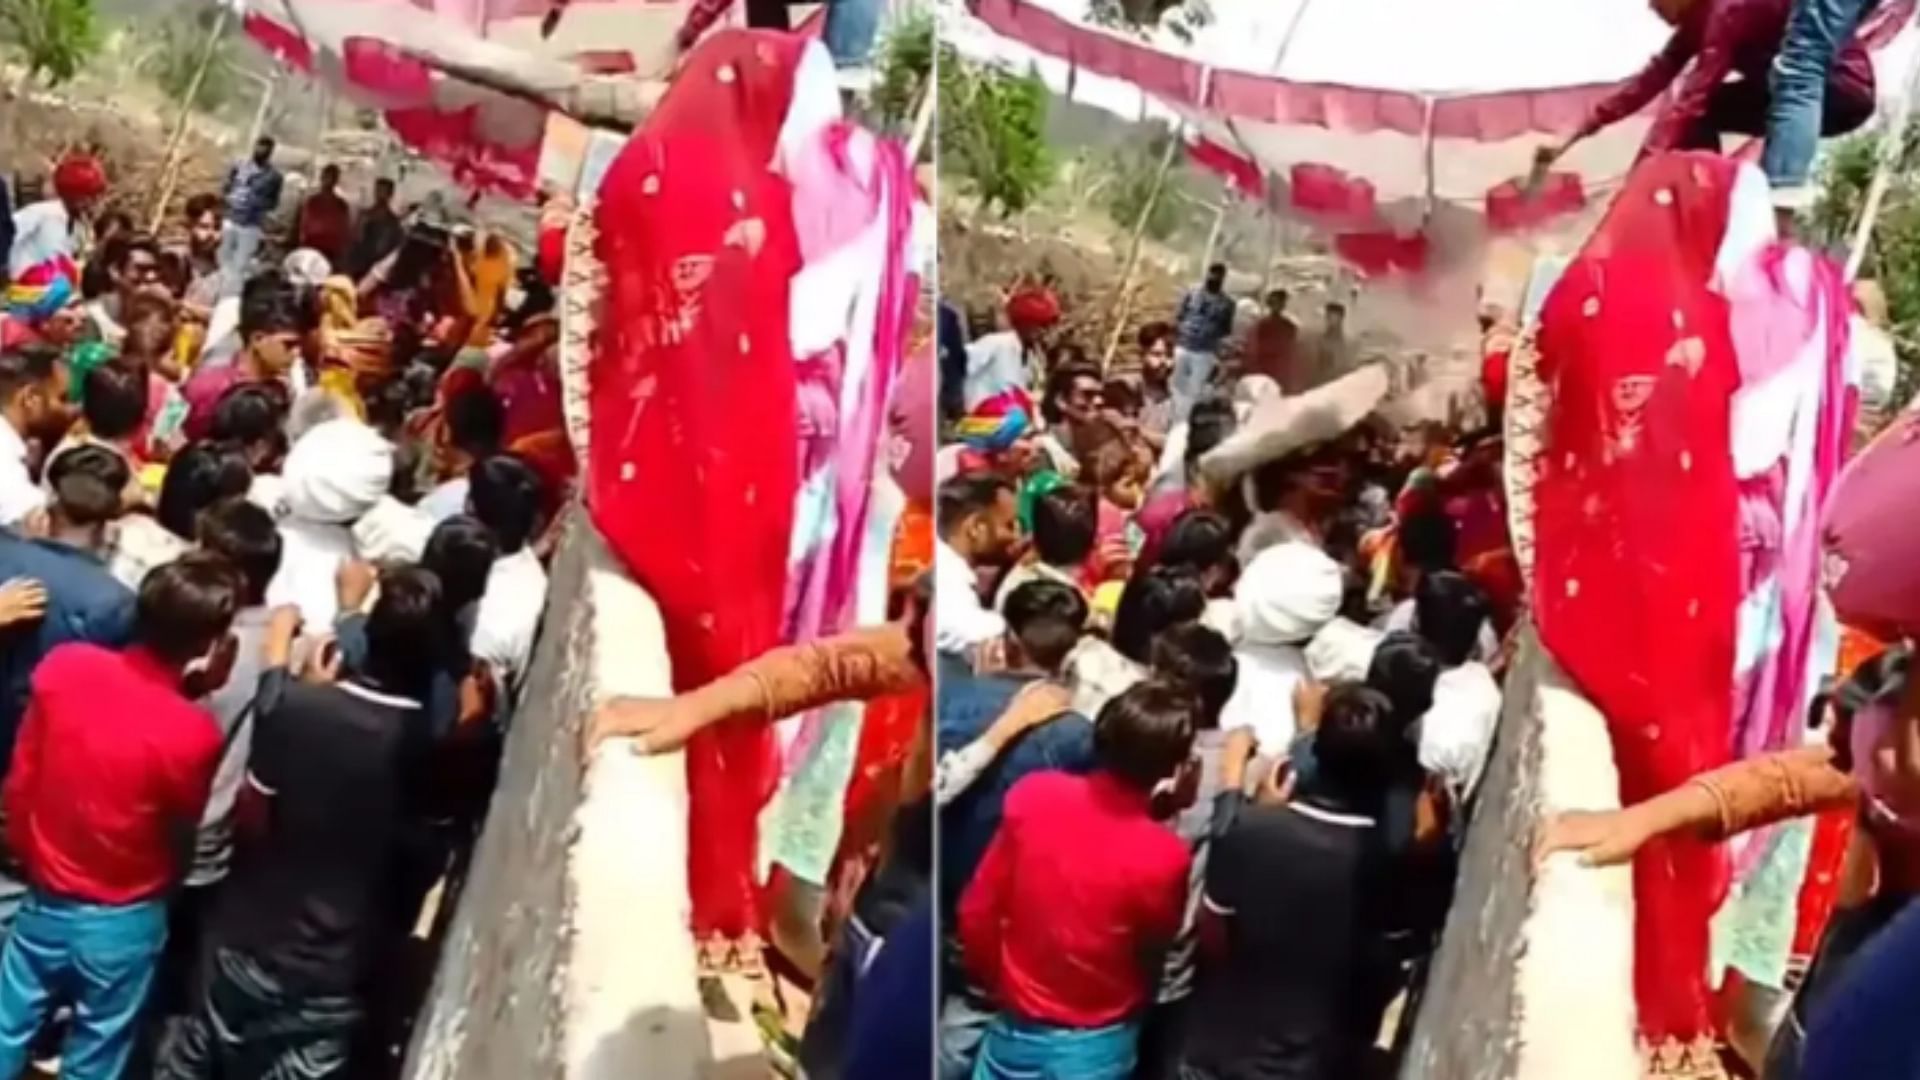 wedding party accident groom injured with bride indian wedding video viral